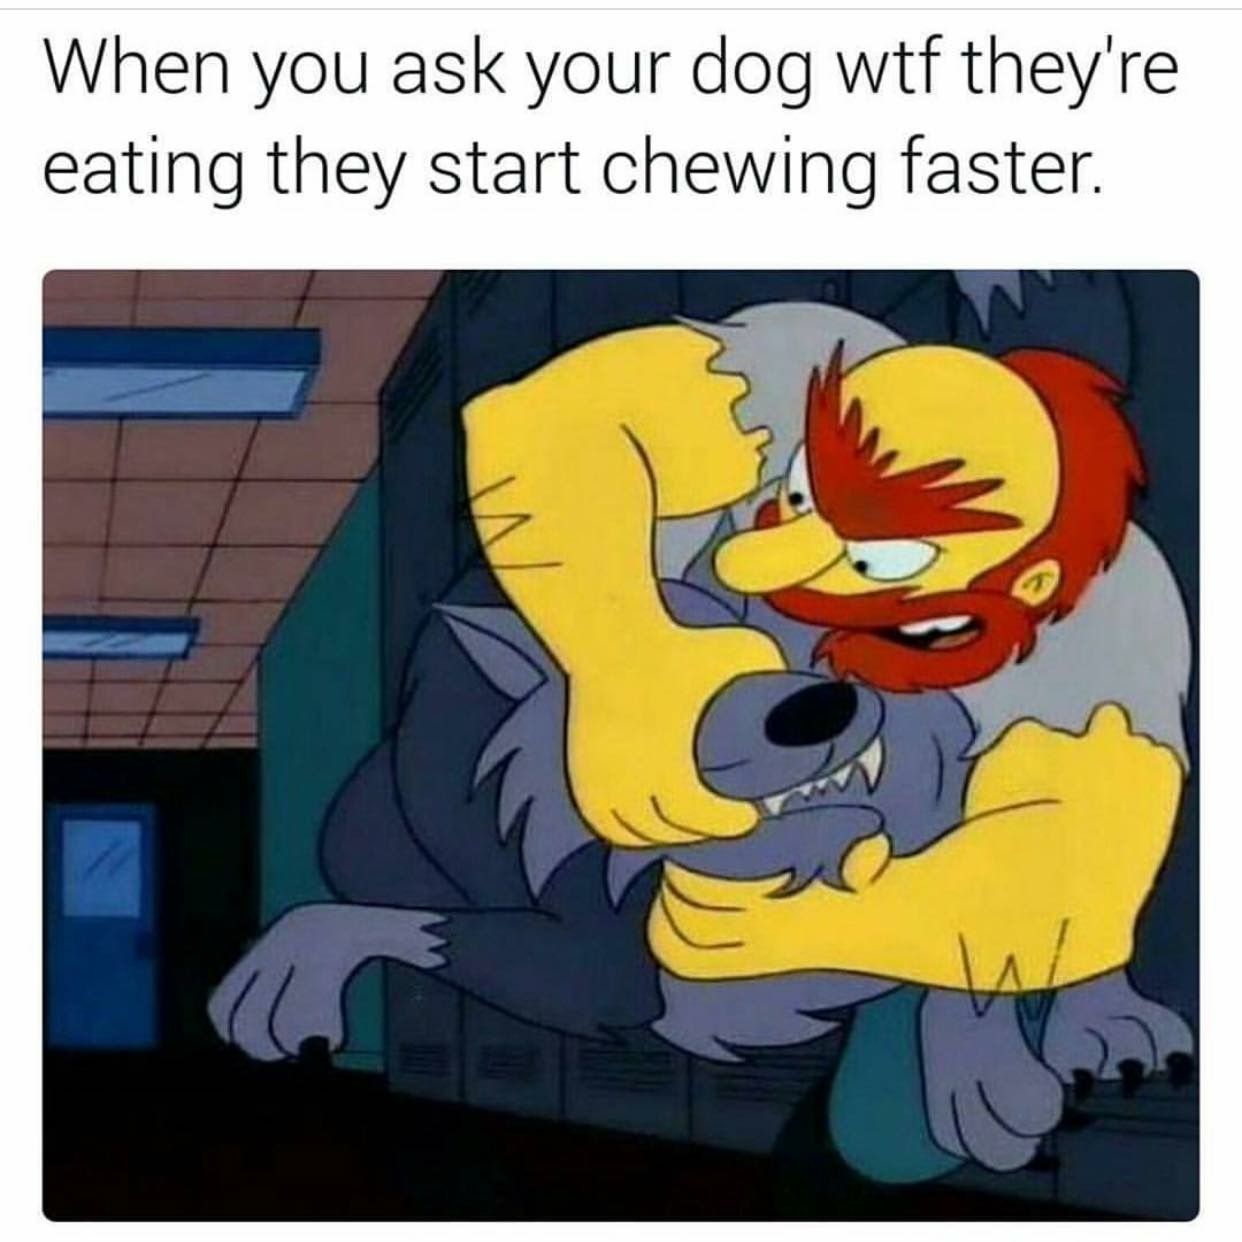 you ask your dog what they re eating and they start chewing faster - When you ask your dog wtf they're eating they start chewing faster.